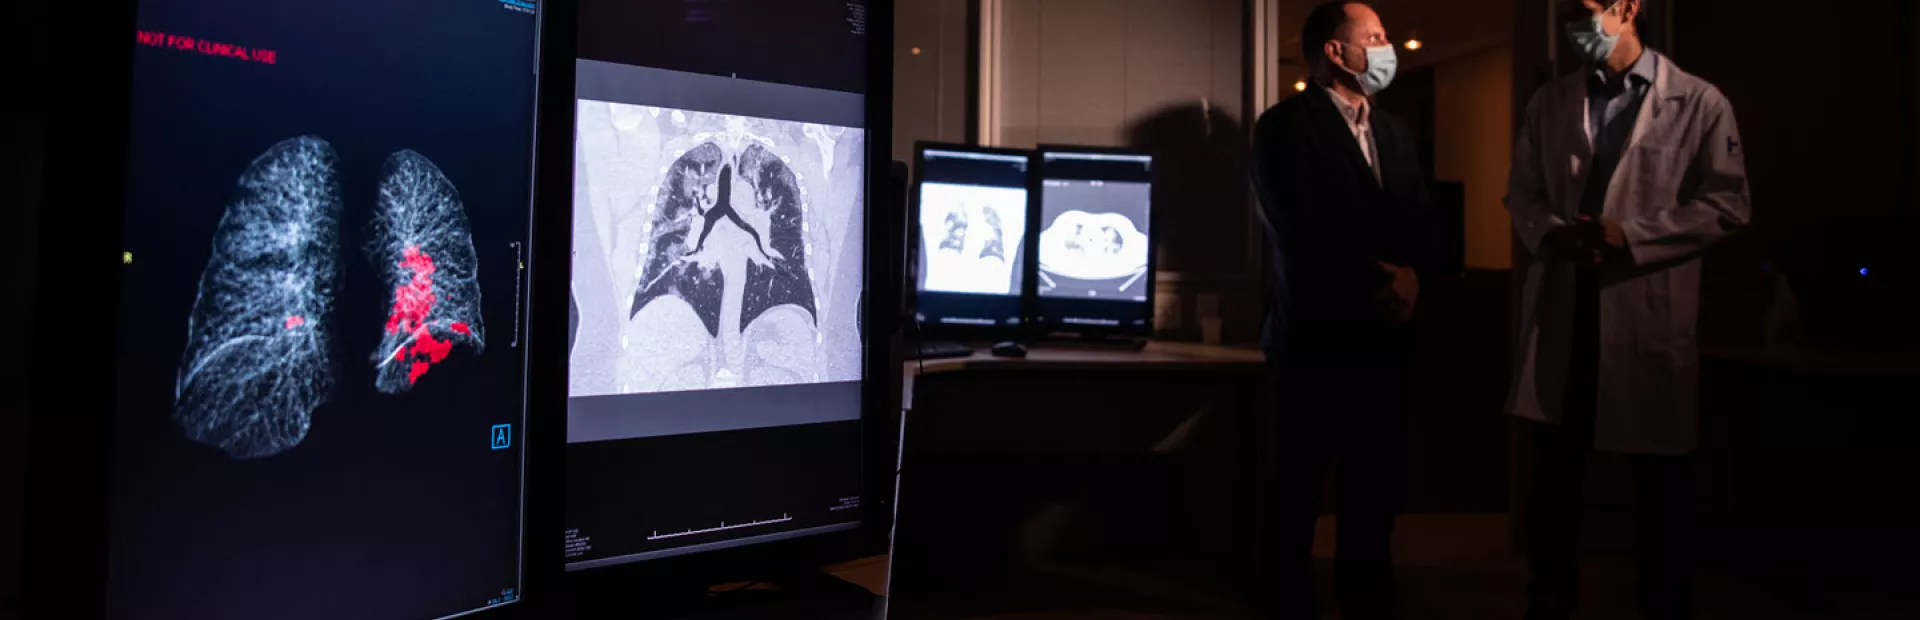 Image of scientists, wearing masks, discussing lung scans